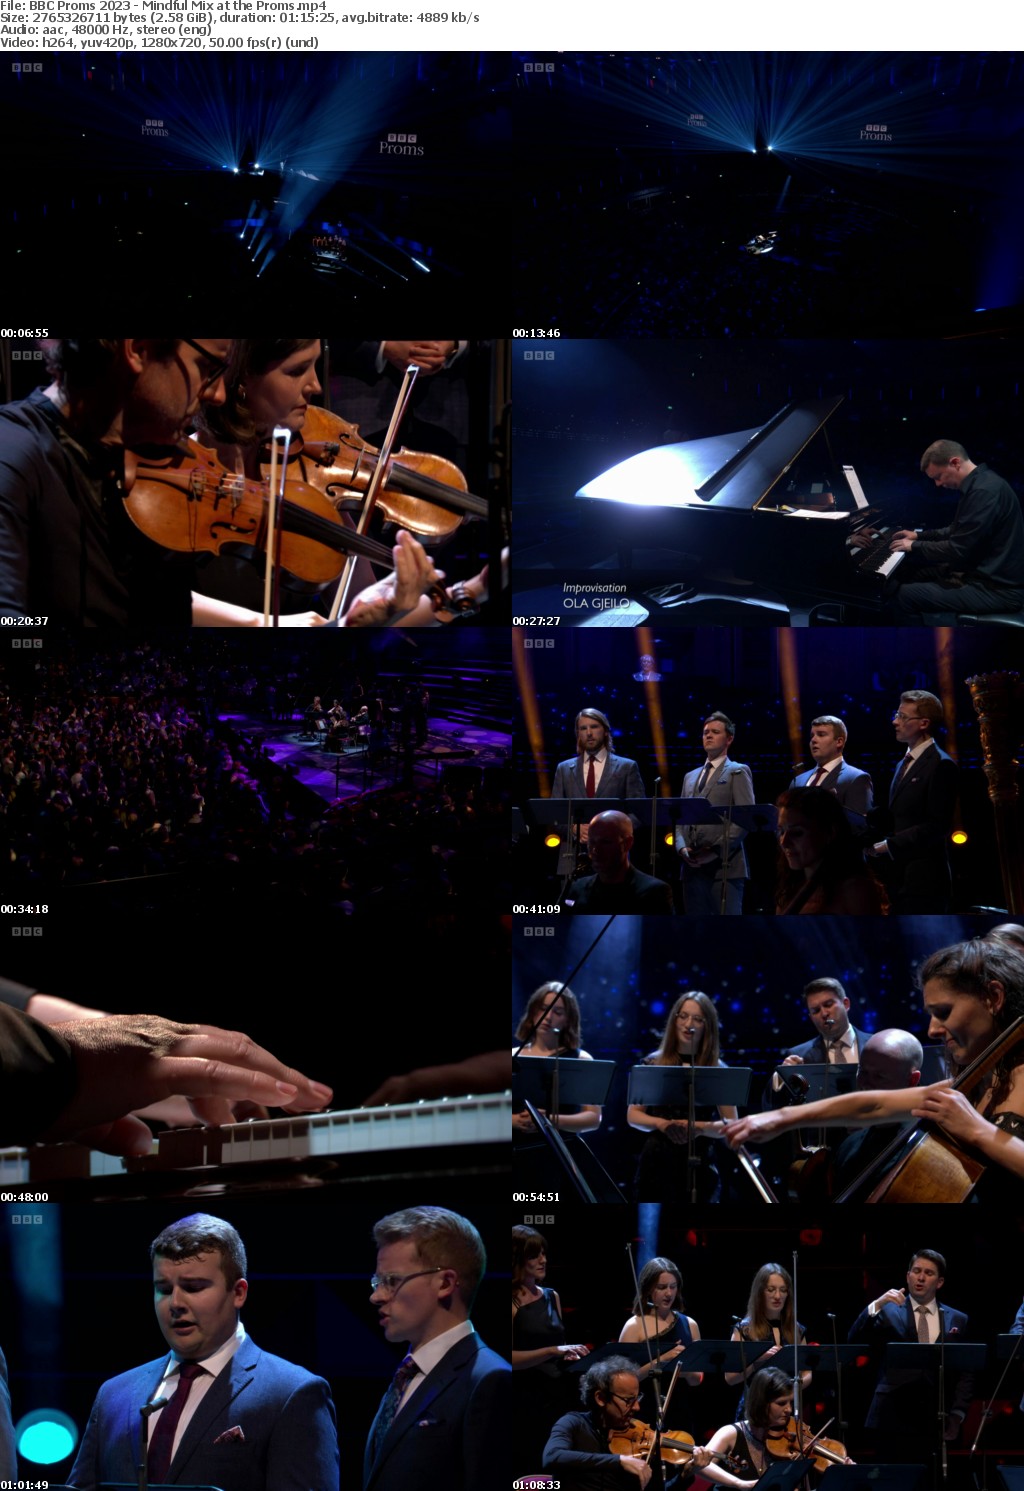 BBC Proms 2023 - Mindful Mix at the Proms (1280x720p HD, 50fps, soft Eng subs)